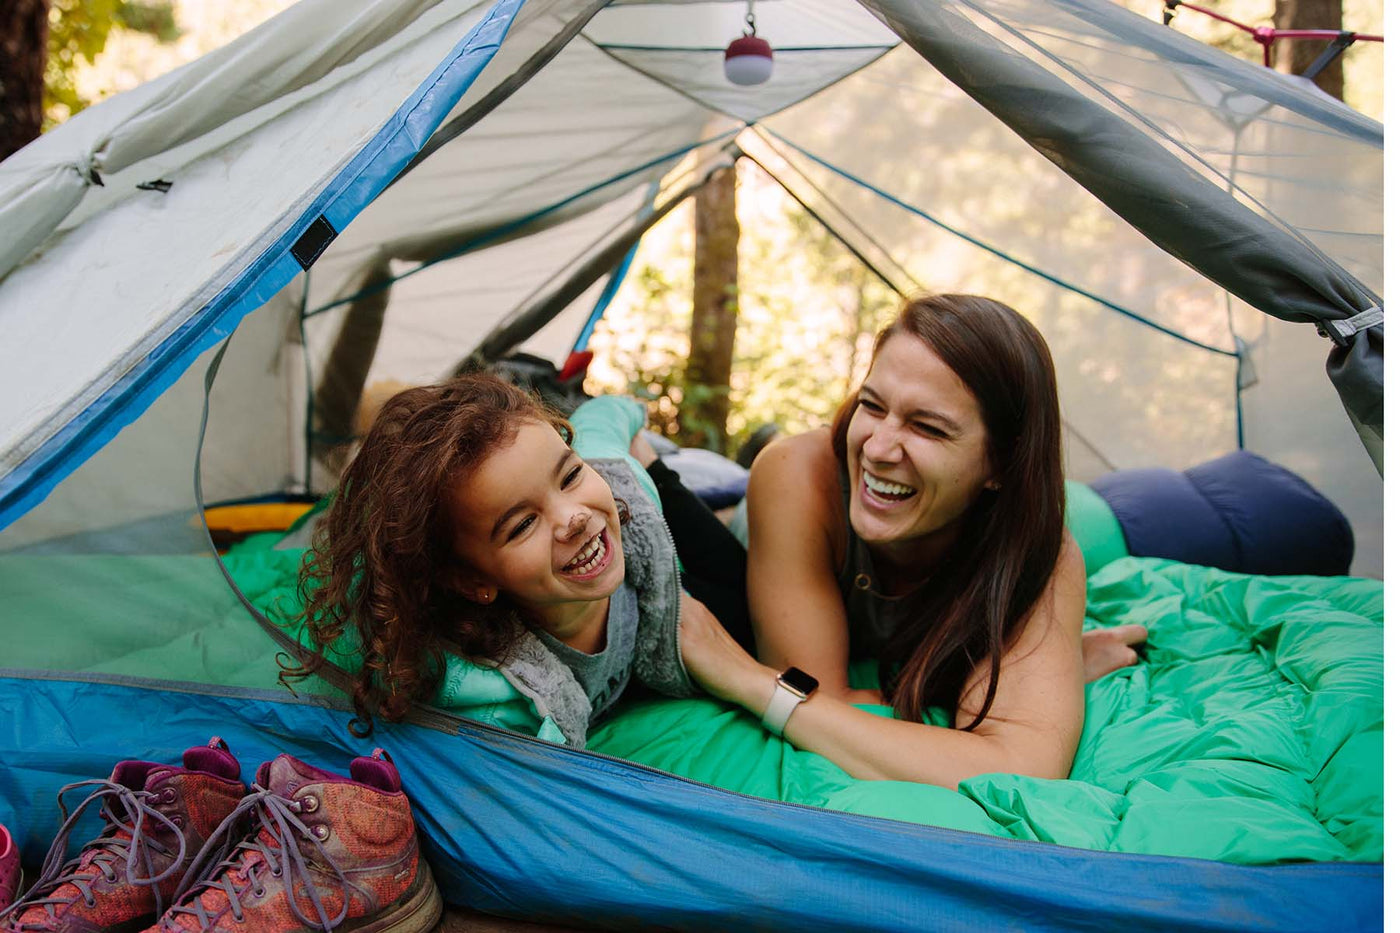 How to Plan a Backyard Camping Night With Your Family